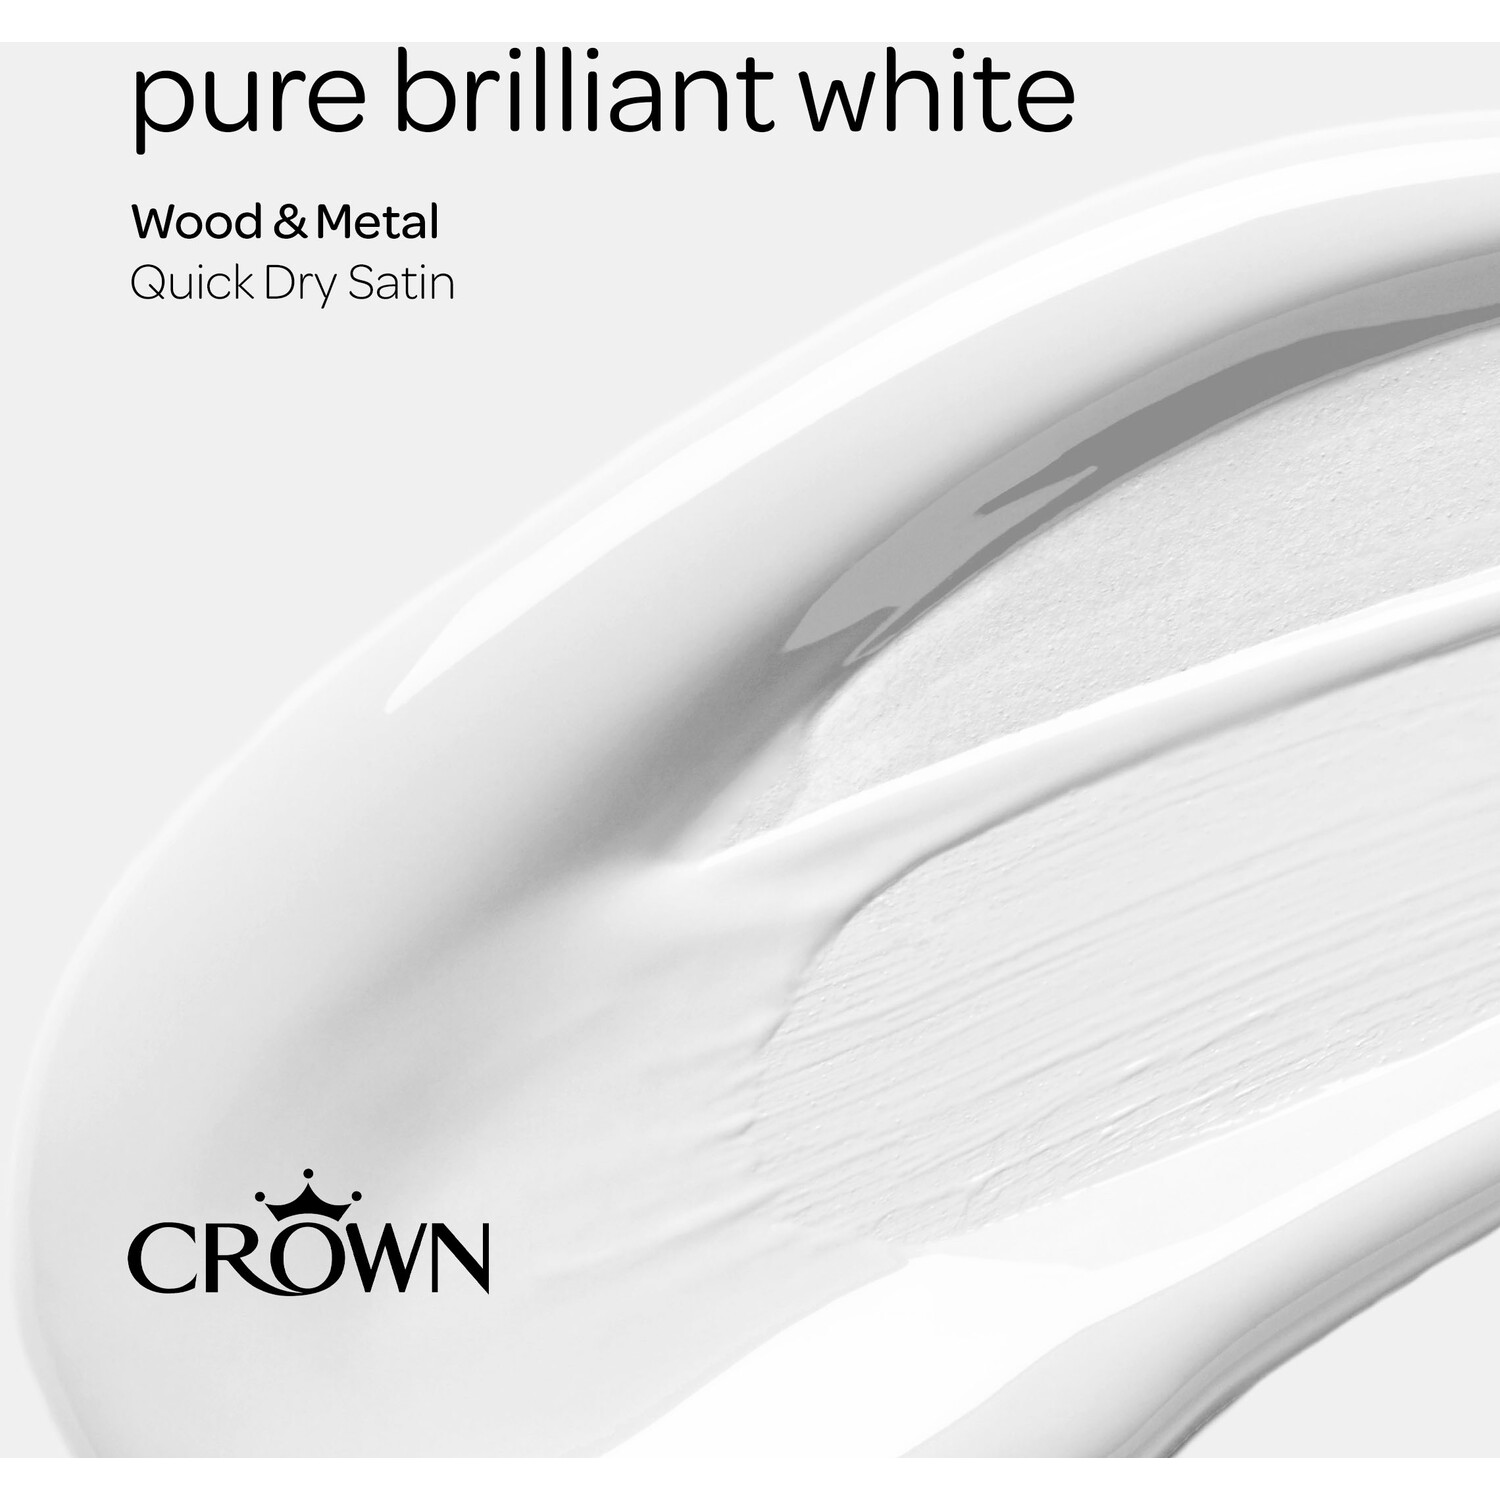 Crown Quick Dry Wood and Metal Pure Brilliant White Satin Paint 2.5L Image 5